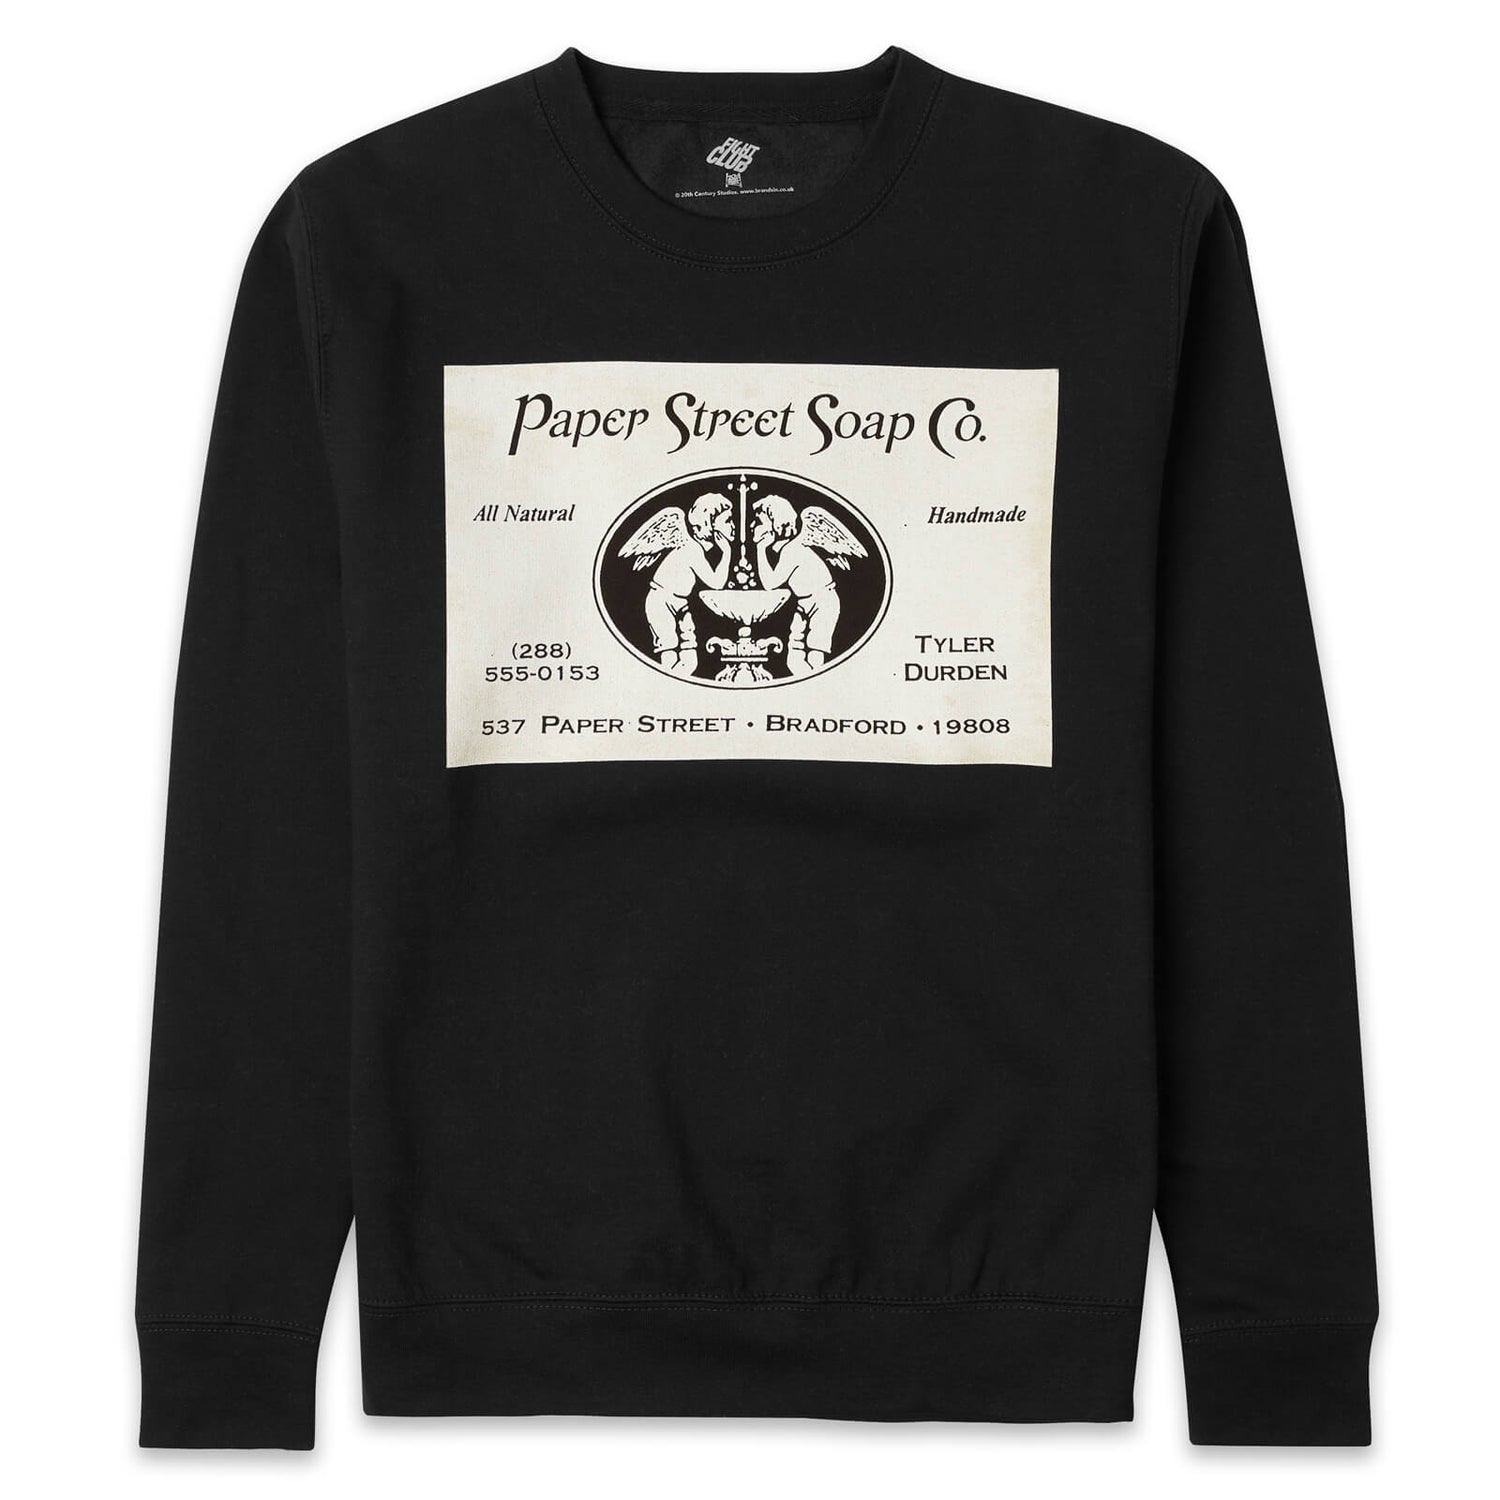 Officially Licensed Fight Club Paper Street Soap Company Sweatshirt S-XXL 